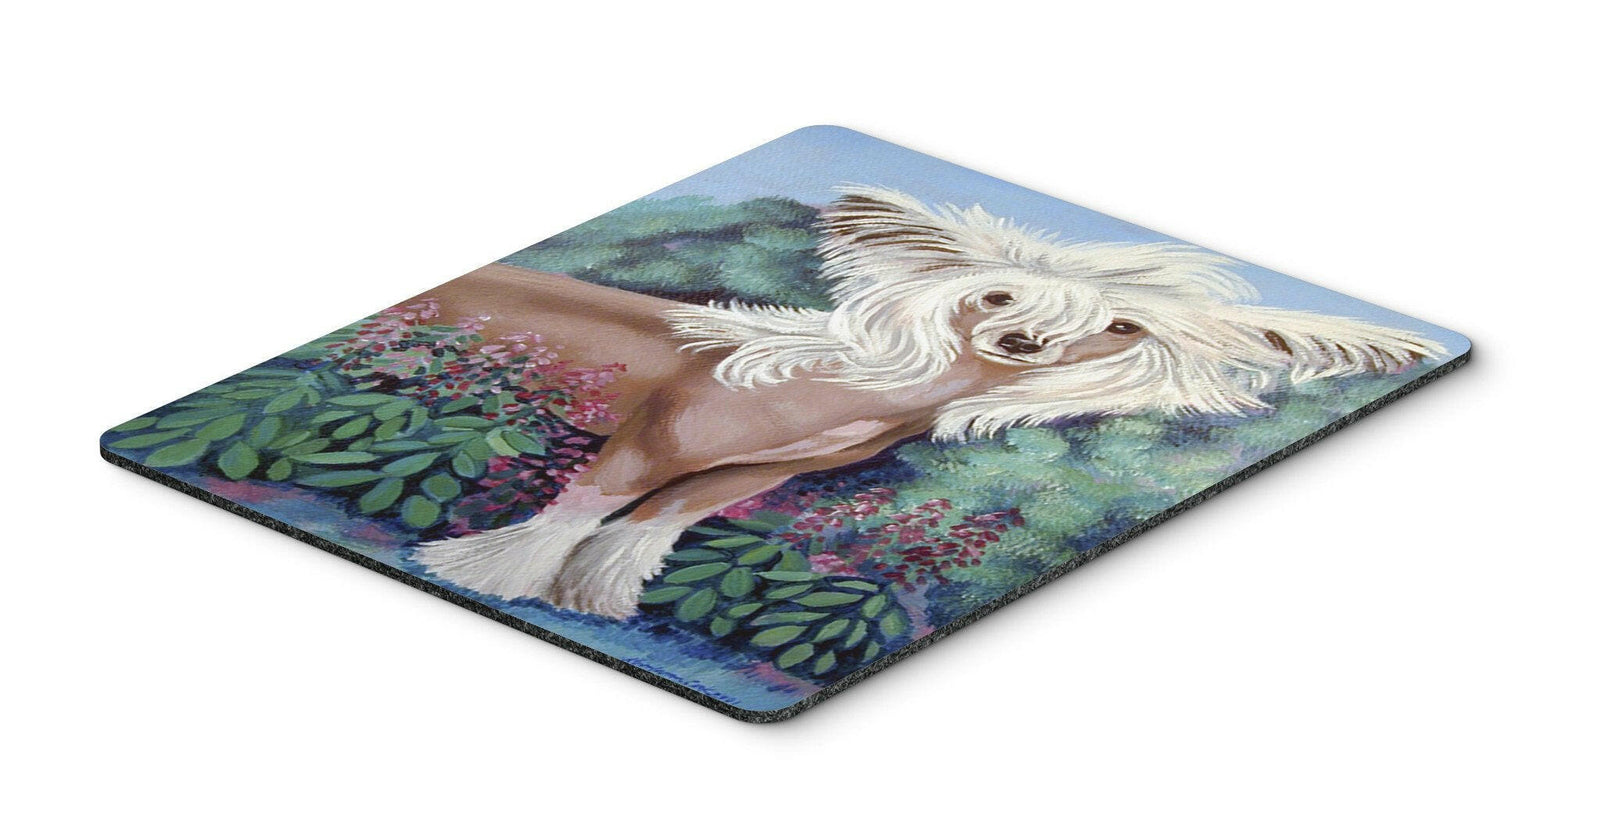 Chinese Crested in flowers Mouse Pad, Hot Pad or Trivet by Caroline's Treasures